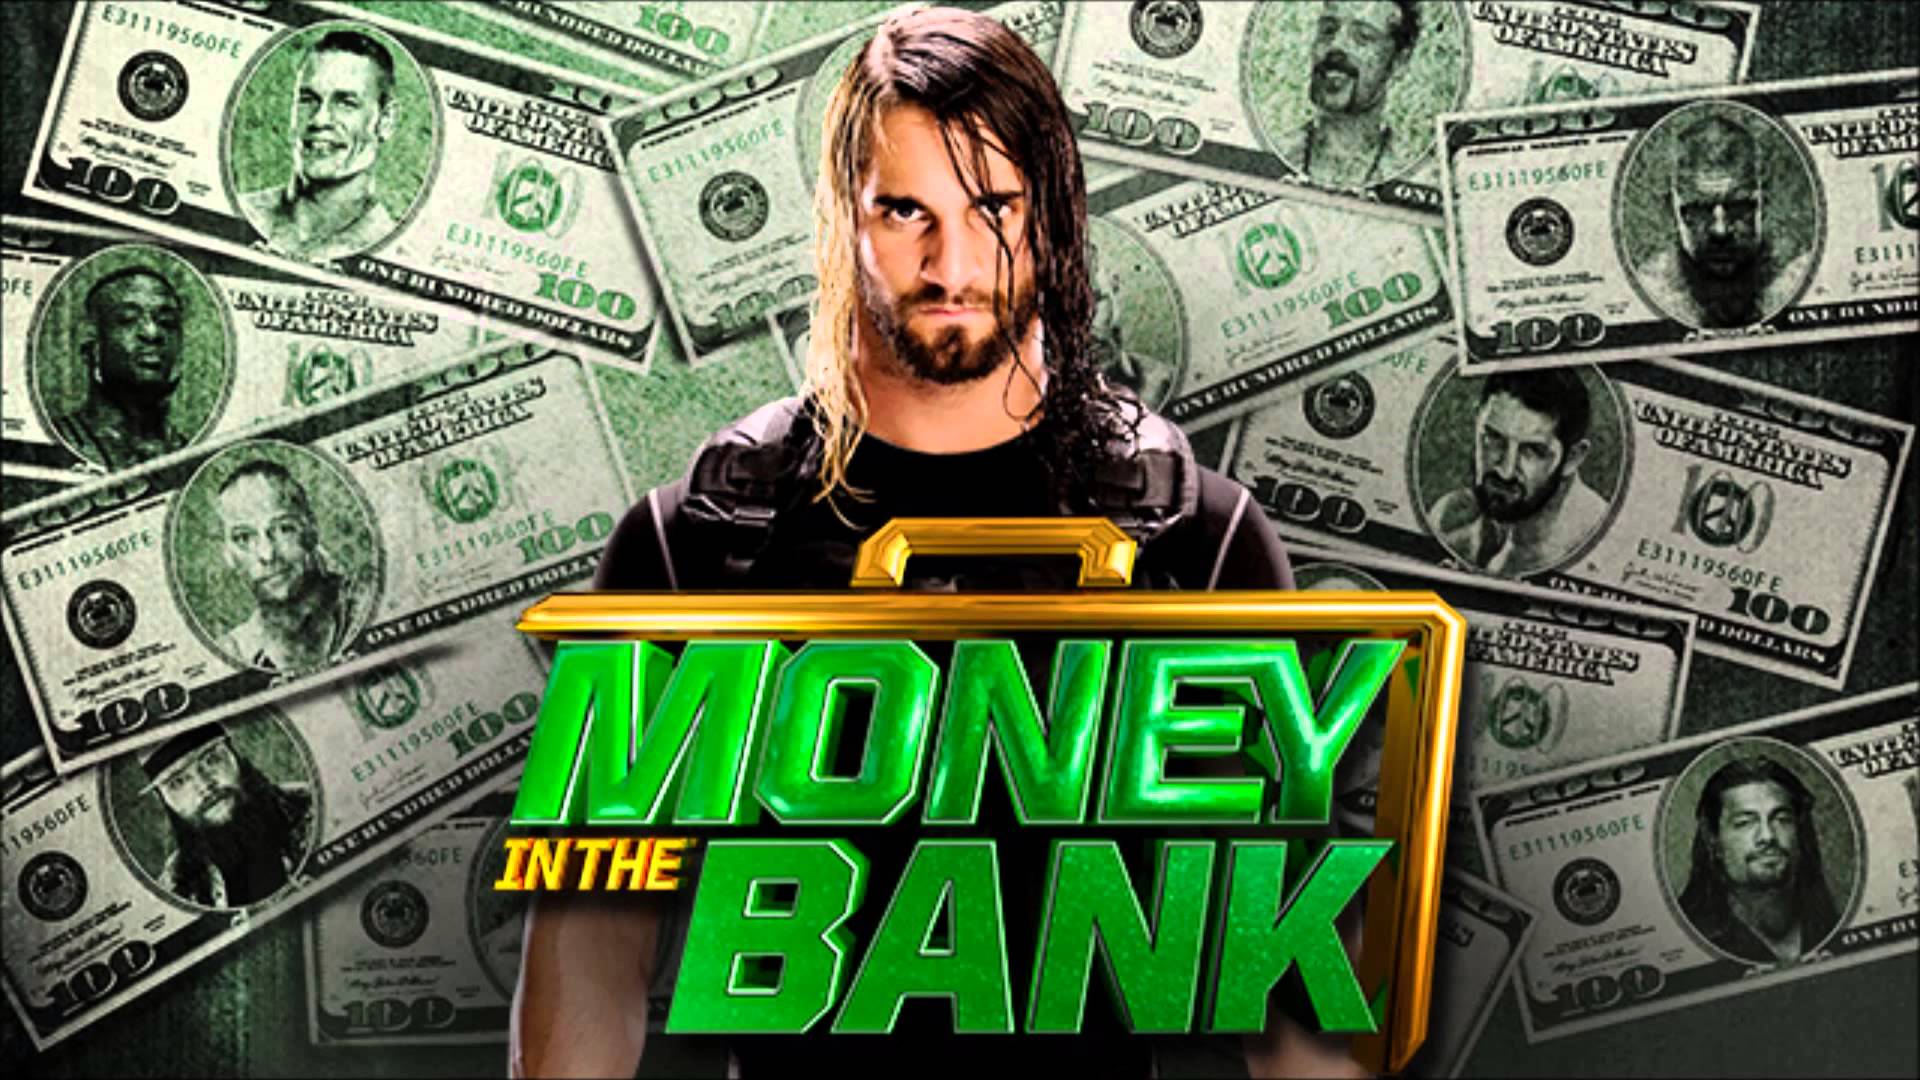 WWE Money in the Bank 2015 Preview and Latest Odds